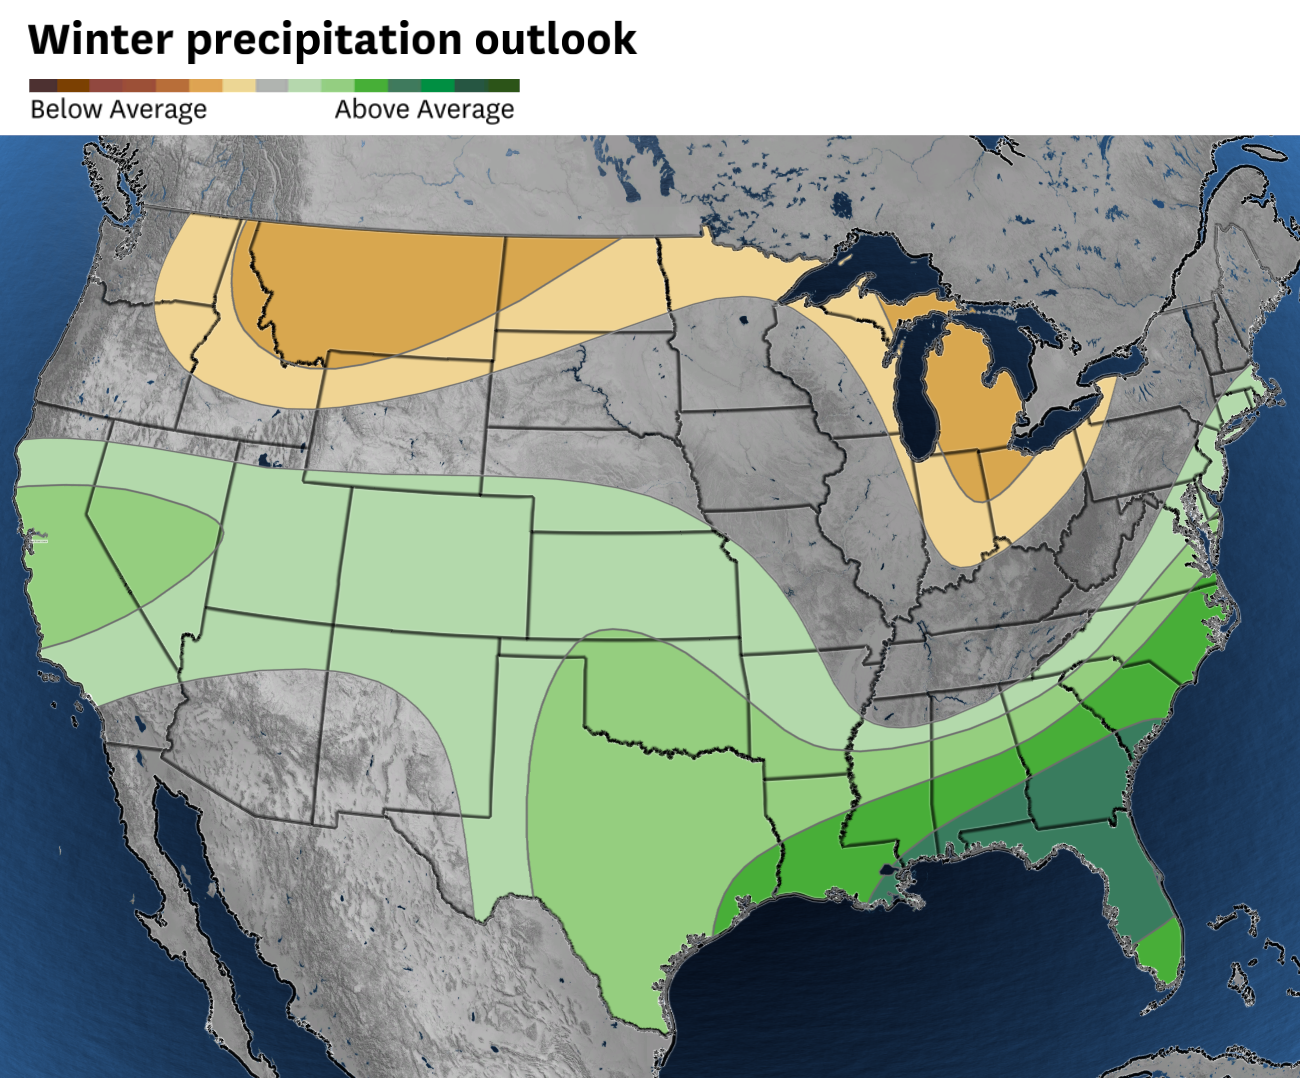 U.S. Winter Outlook: Drier, warmer South, wetter North with return